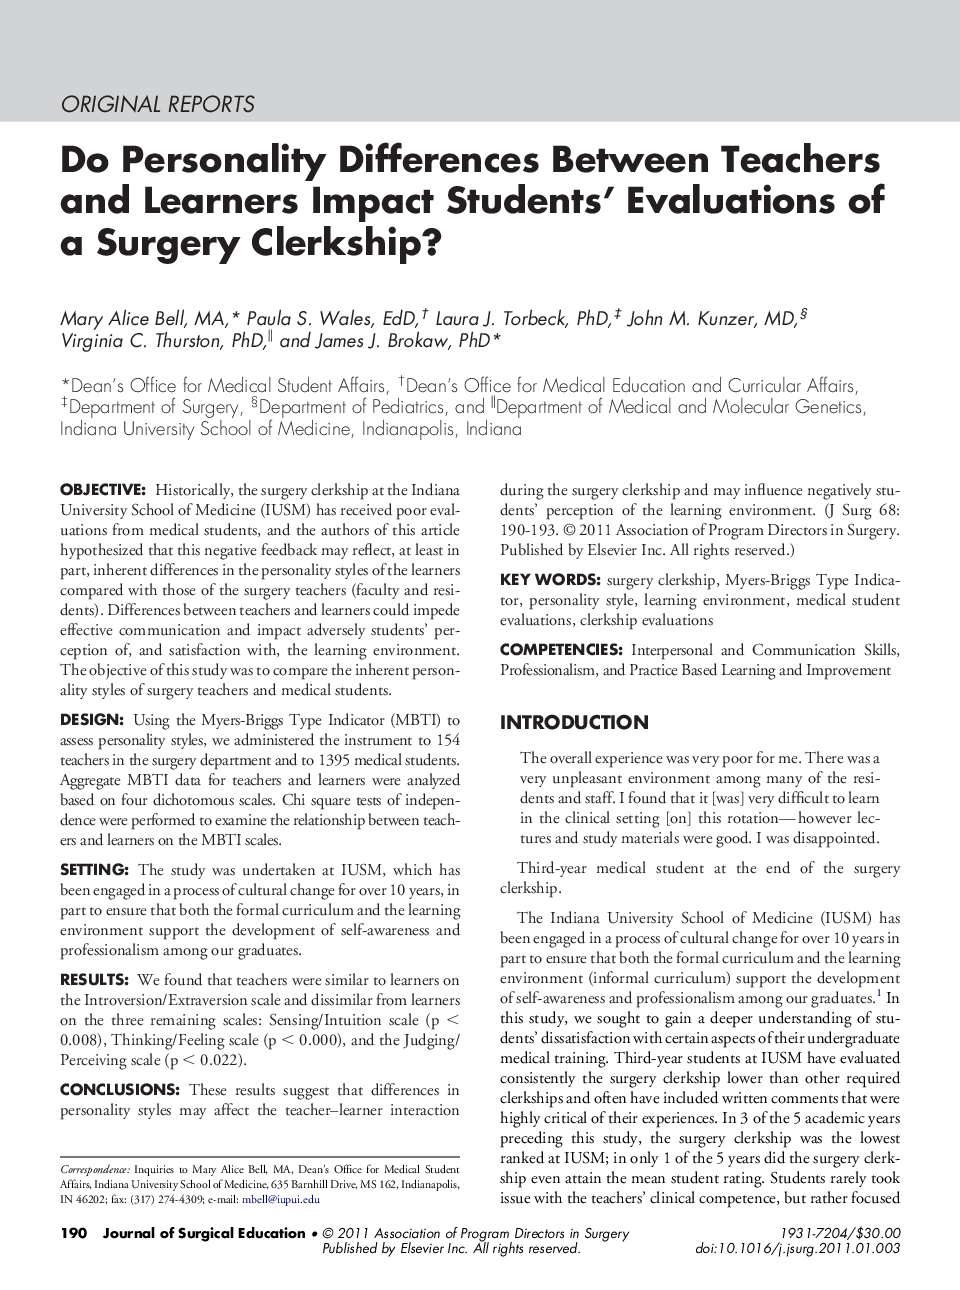 Do Personality Differences Between Teachers and Learners Impact Students' Evaluations of a Surgery Clerkship?